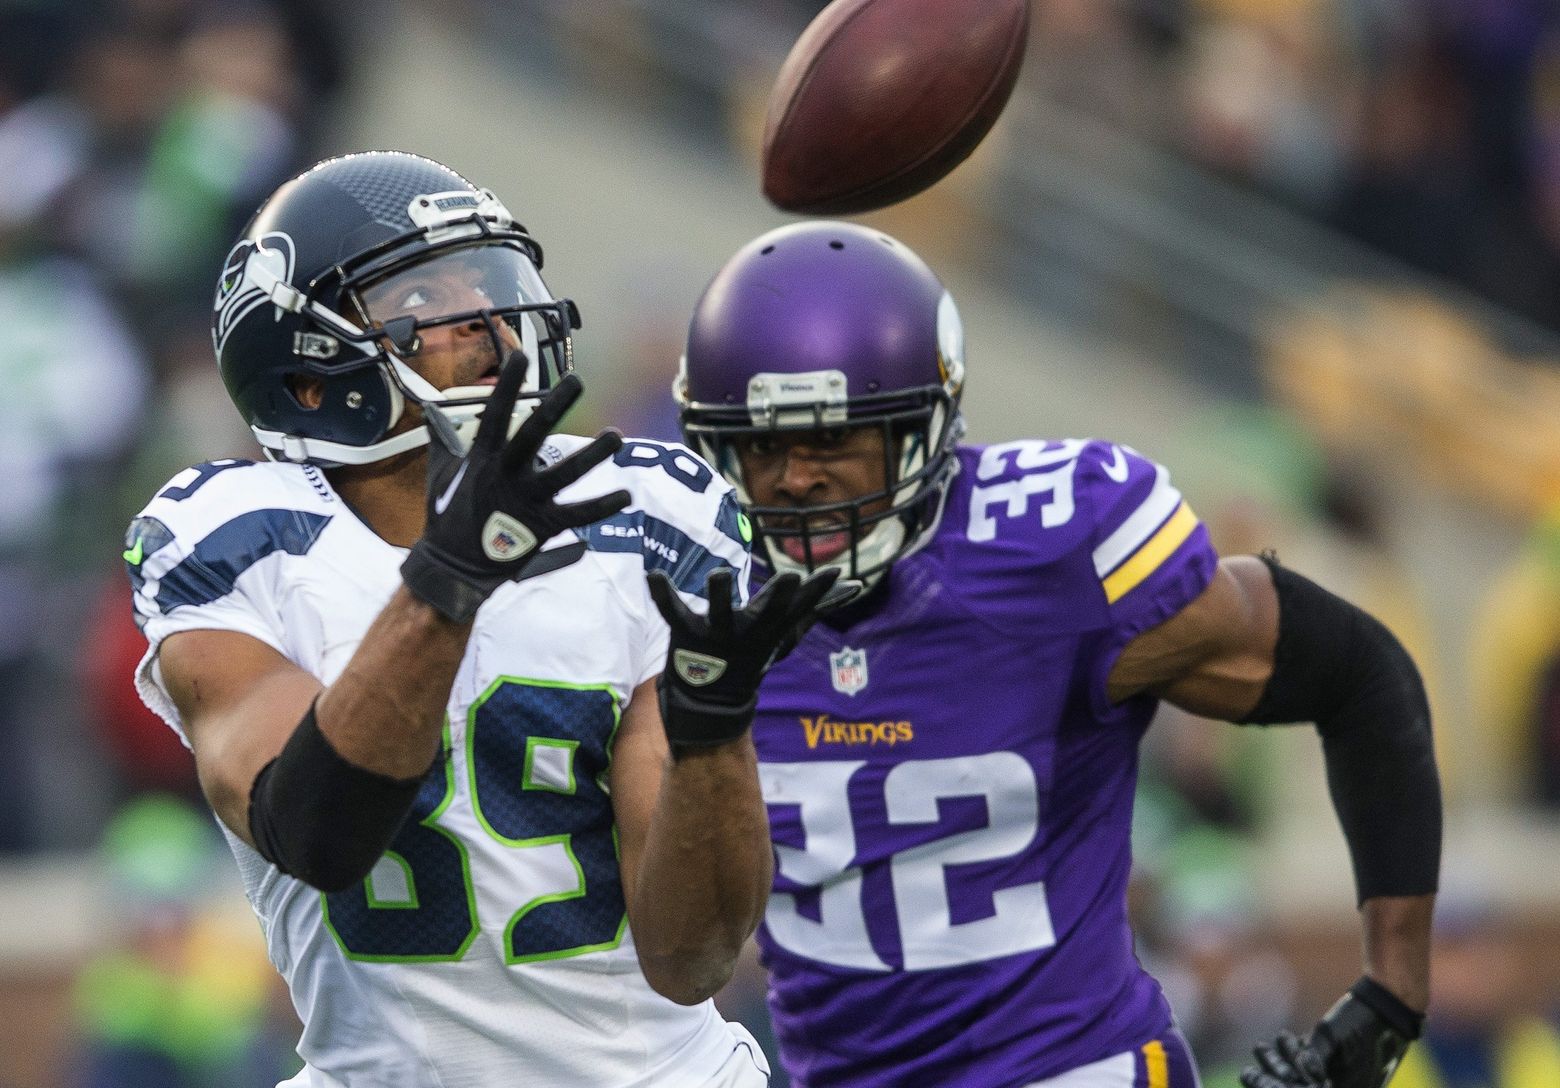 Seahawks wide receiver Doug Baldwin looks back during a 53-yard touchdown reception against the Minnesota Vikings in the second half  Sunday in Minneapolis. (Jim Mone / The Associated Press)